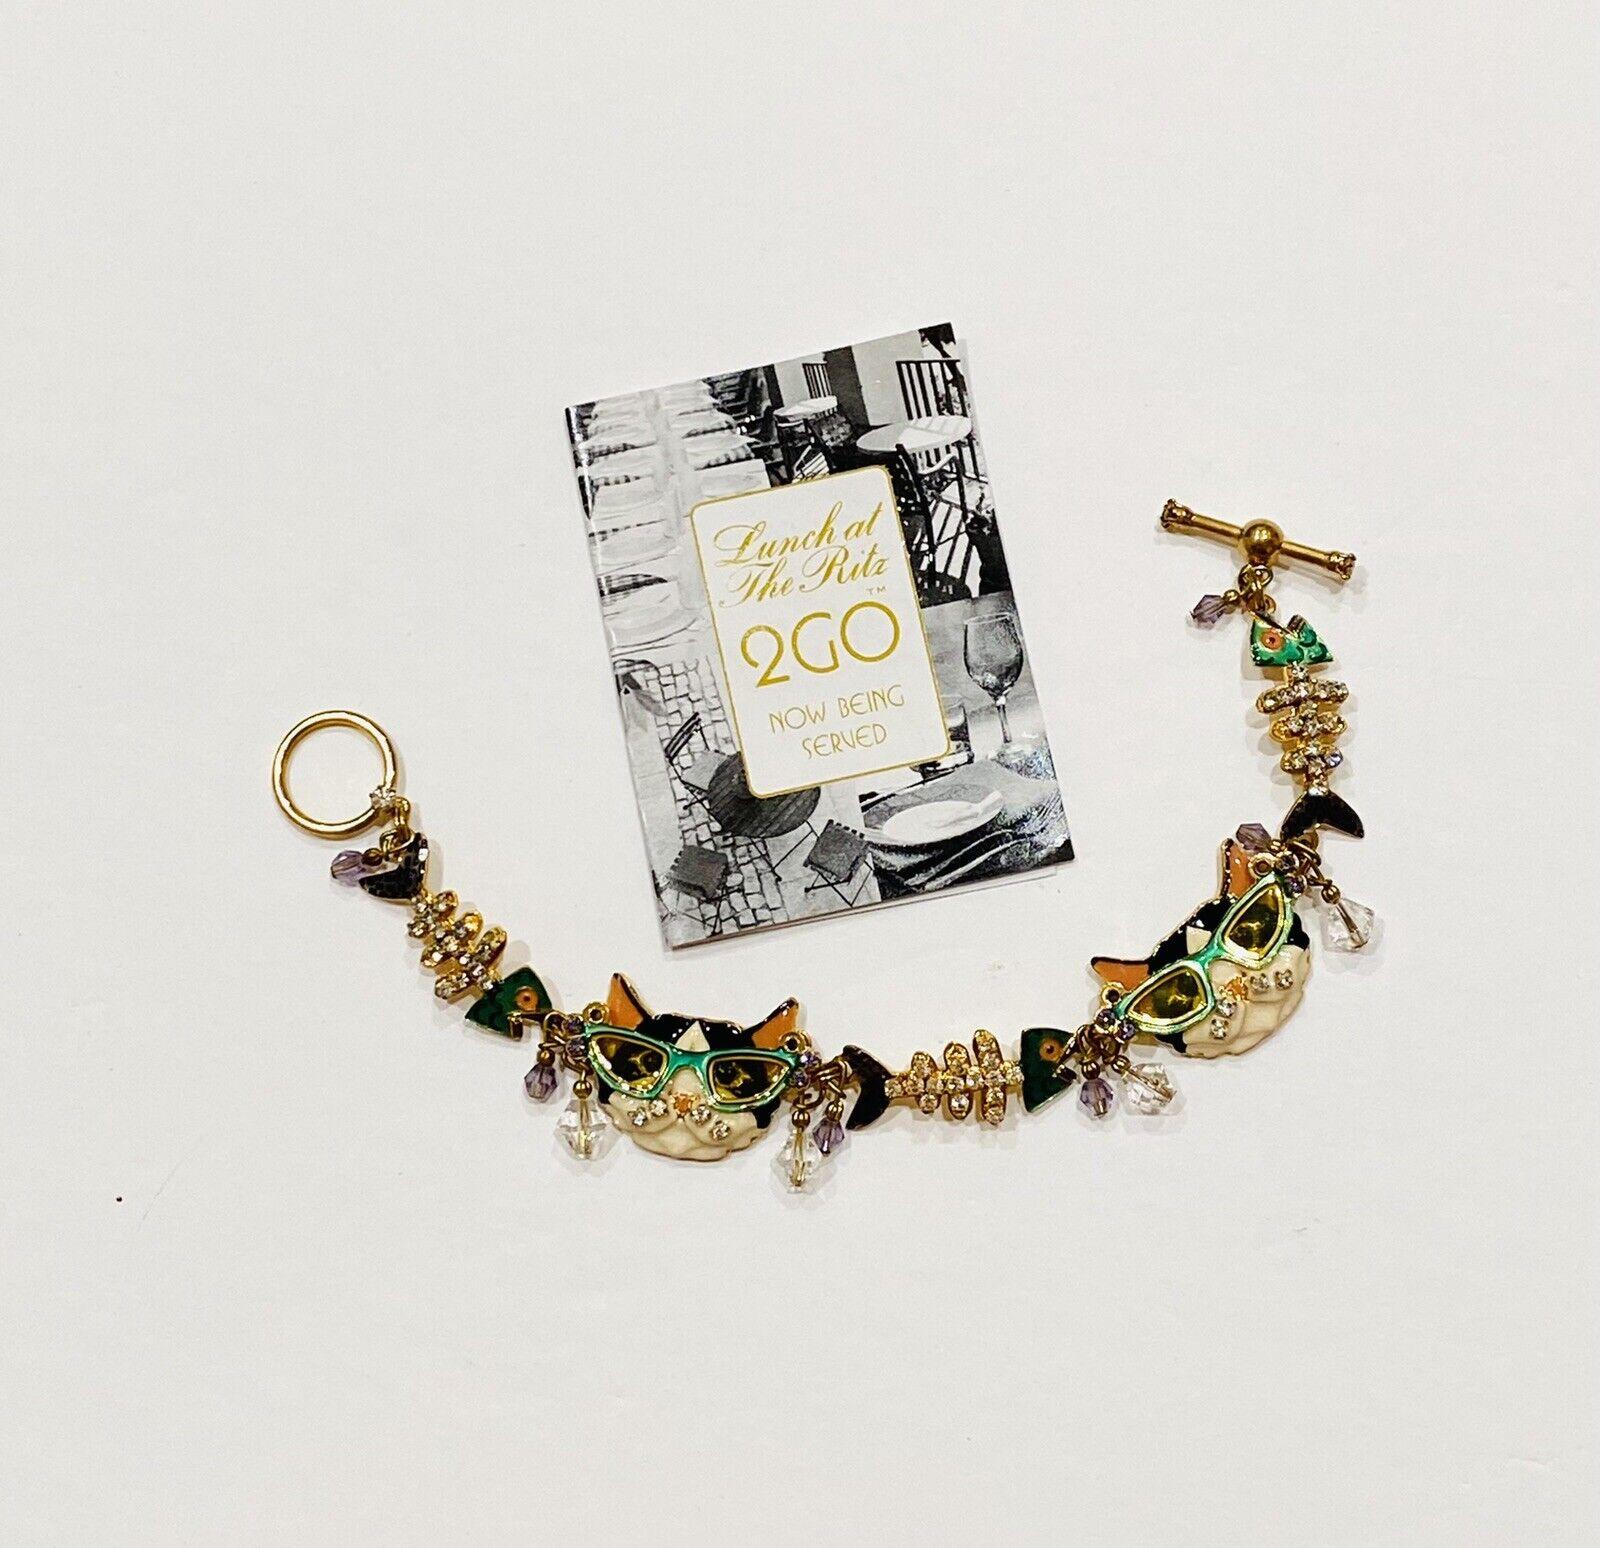 Delightful Vintage Signed Lunch at the Ritz Multi Charm Cats Bracelet. Enamel, Gold plated. Approx. 7.5” Long. Excellent Condition. Chic and Fun to Wear…Sure to be admired...A piece you’ll turn to time and again!  


